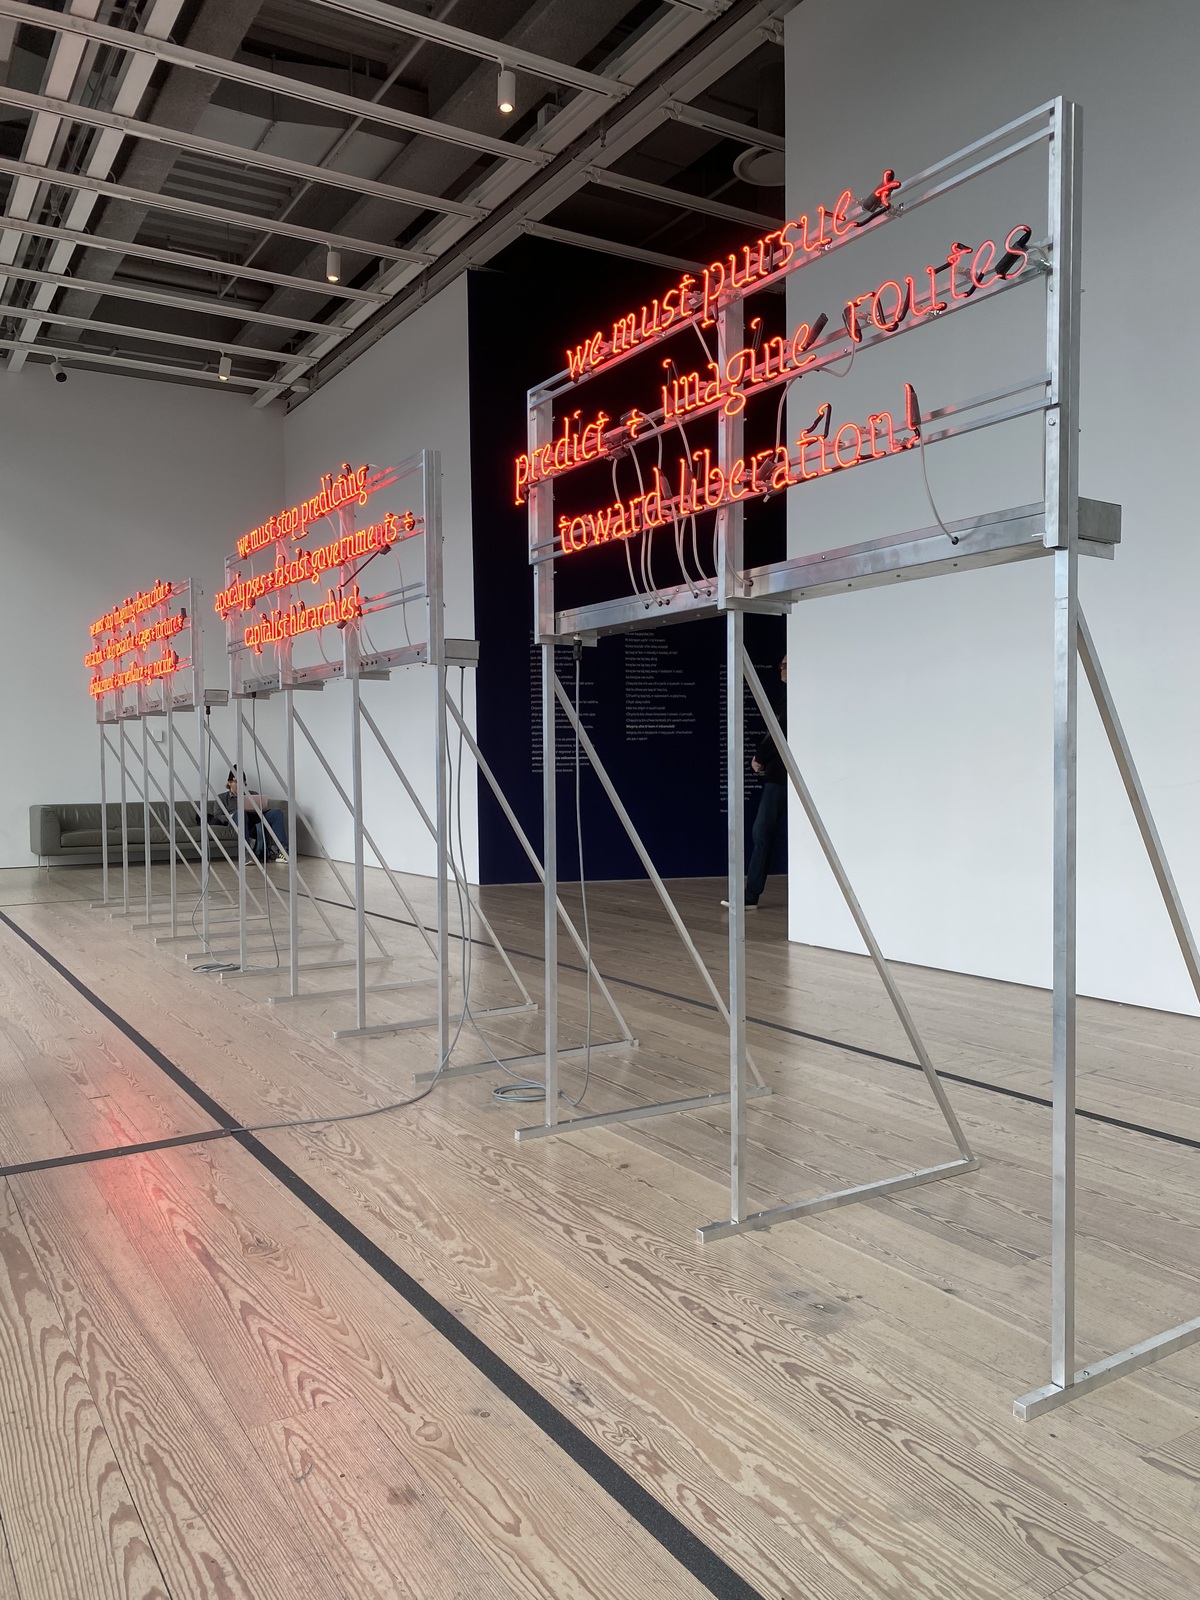 Neon sign art displayed at the Whitney Biennial